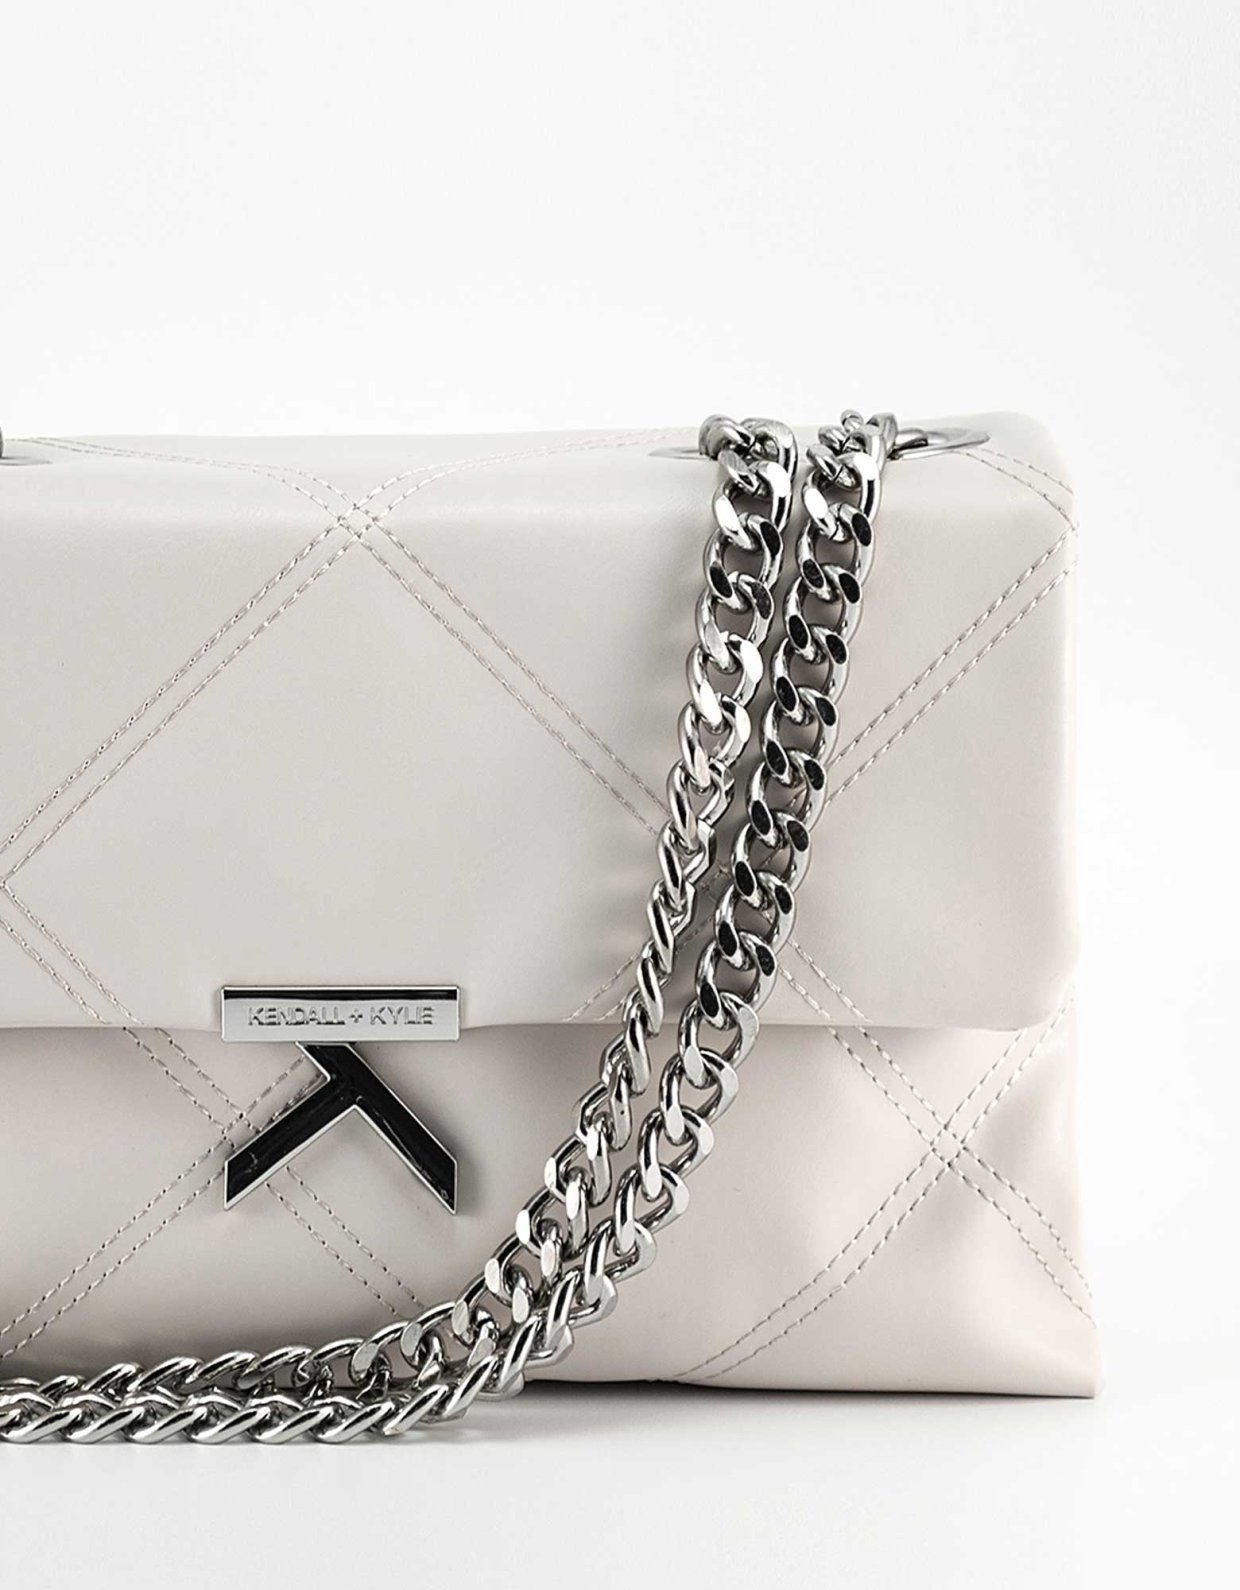 Kendall + Kylie Alexis quilted faux leather bag off white